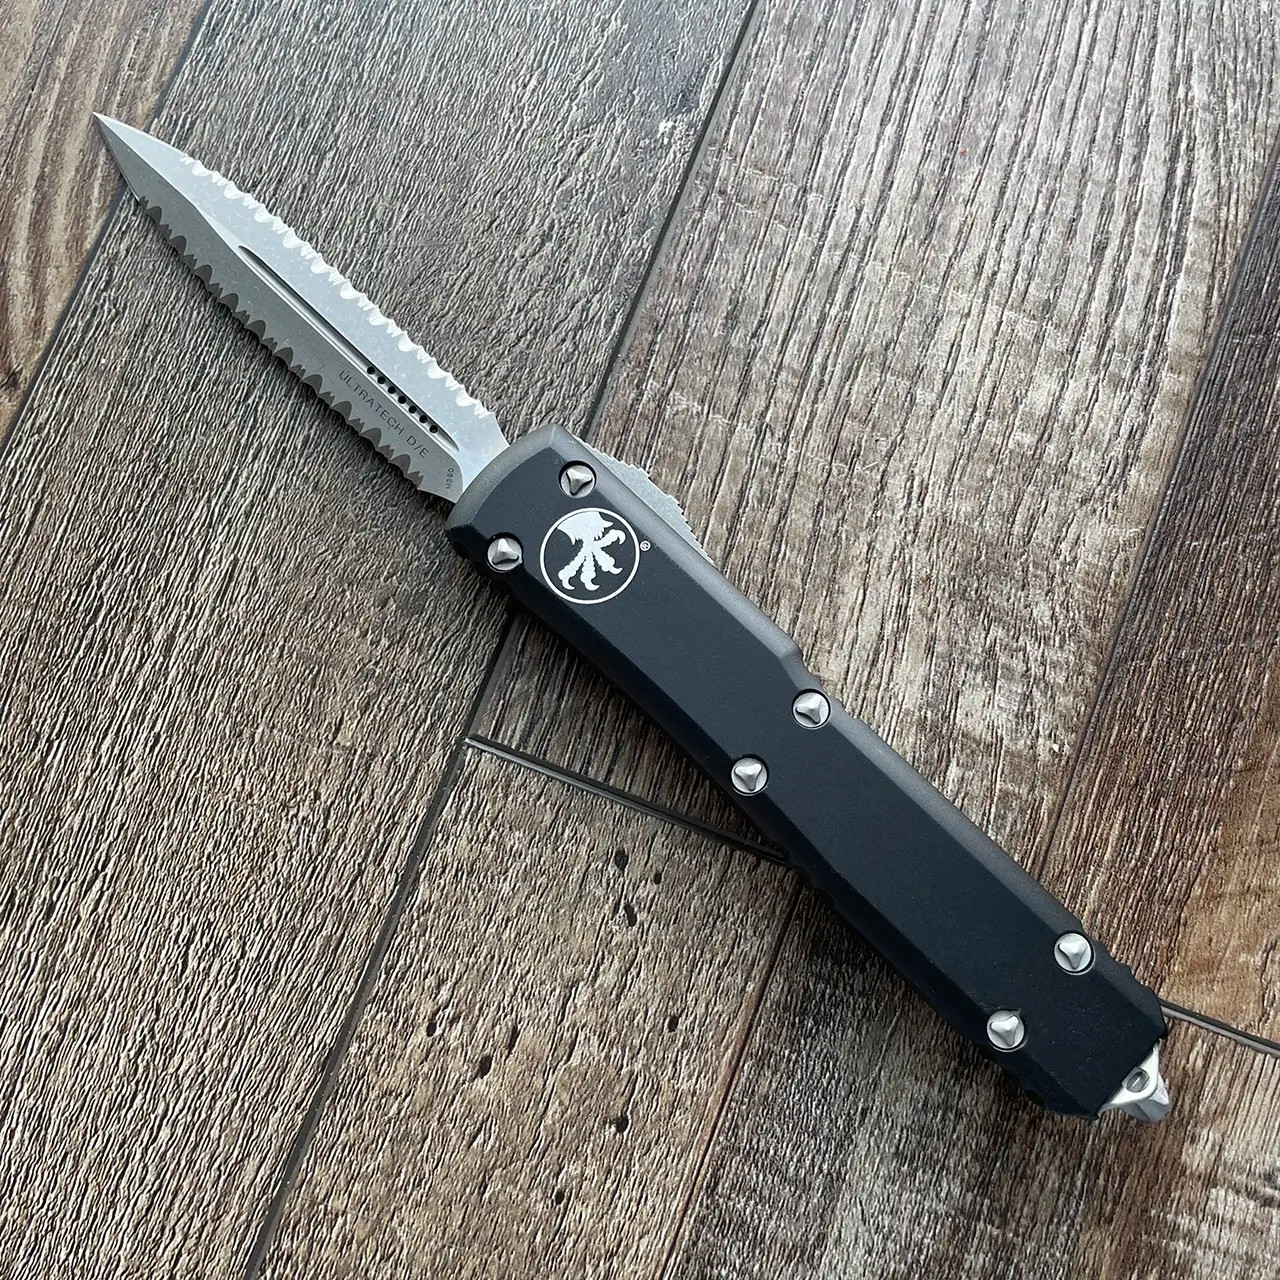 https://cdn11.bigcommerce.com/s-1tyihs272l/images/stencil/original/products/7483/17264/Microtech-122-D12AP-Ultratech-DE-Black-Apocalyptic-Double-Full-Serrated__10847.1675974238.jpg